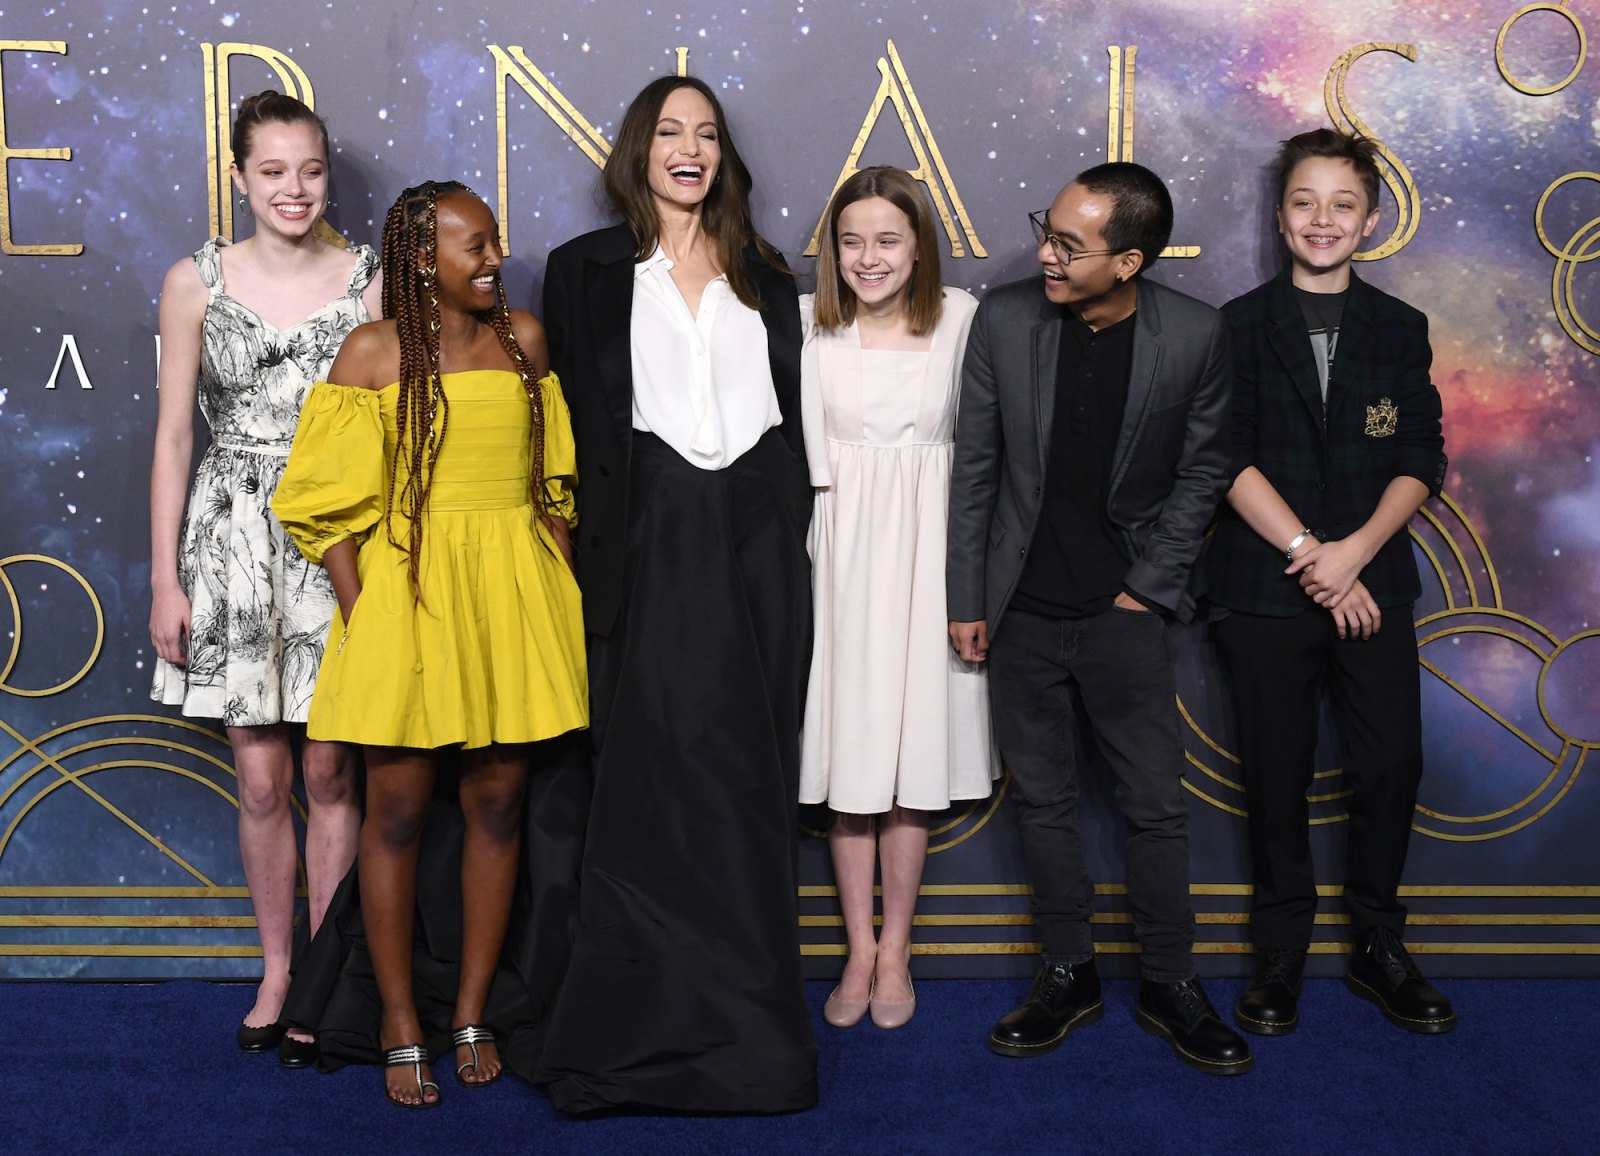 See Angelina Jolie Posing With 5 of Her Kids at 'Eternals' Premiere